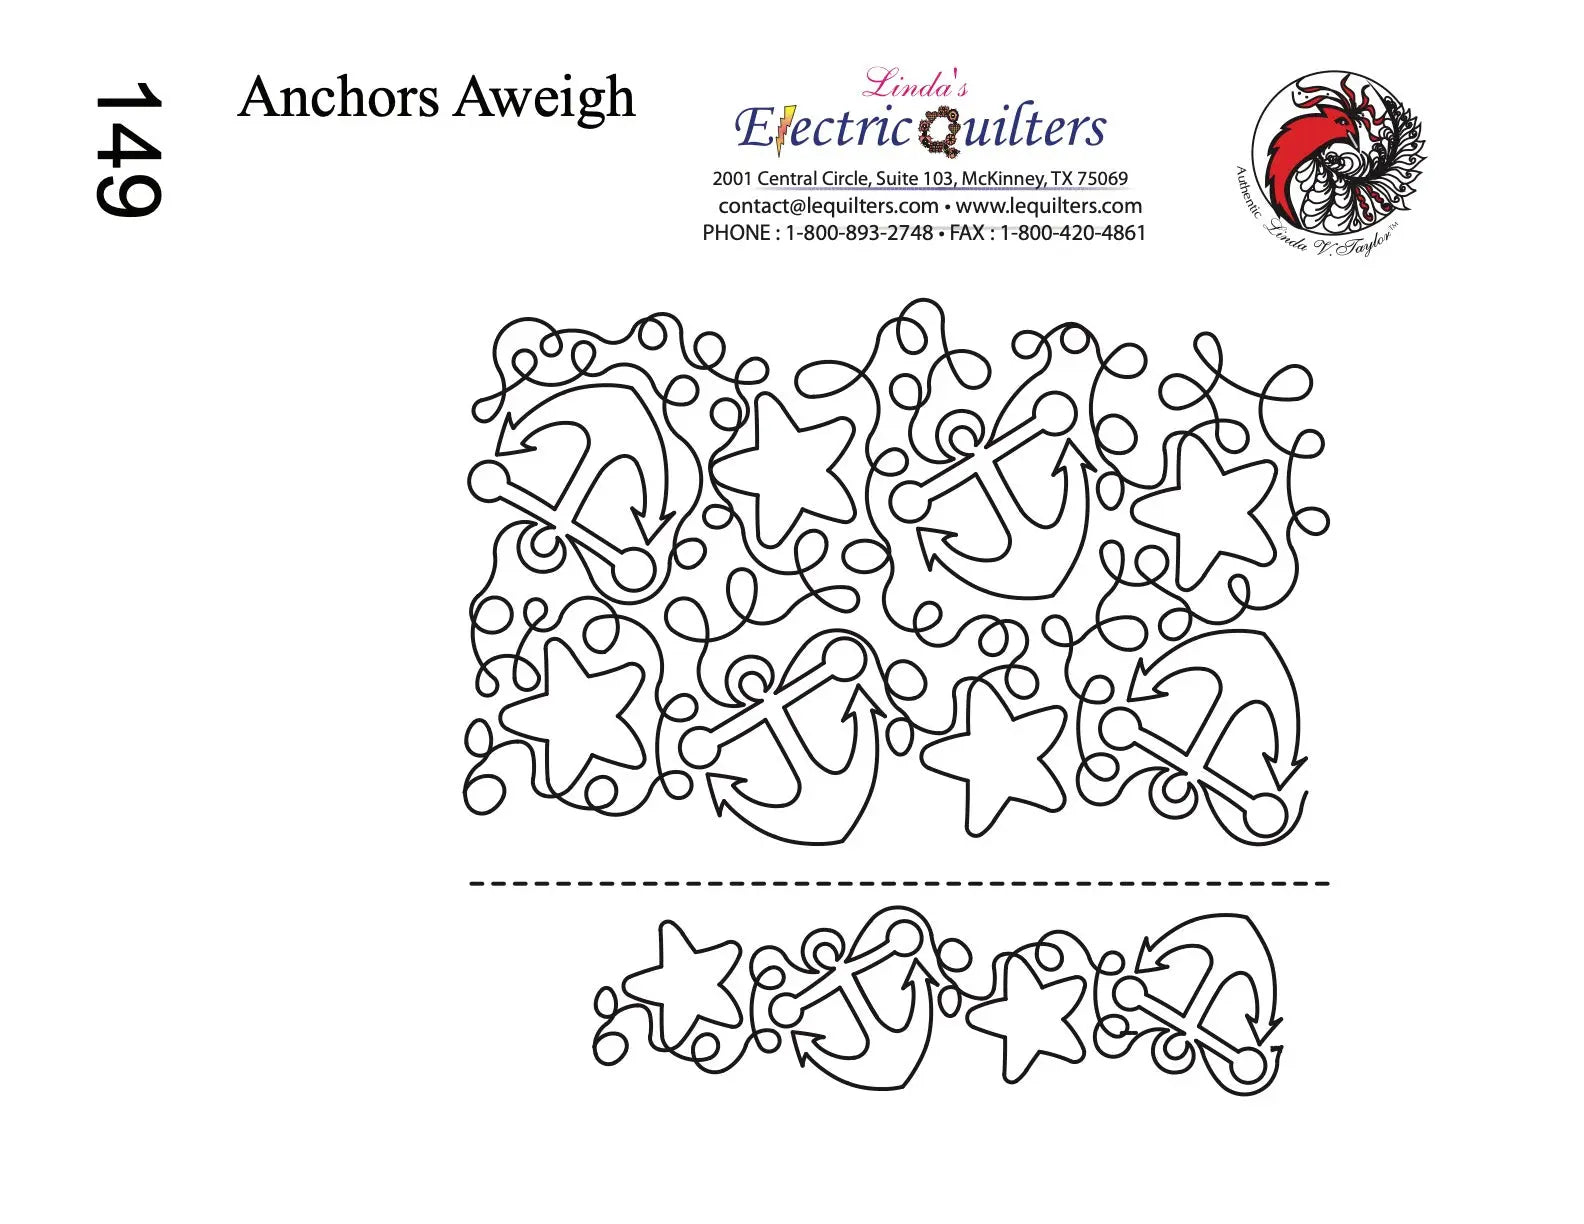 149 Anchors Aweigh Pantograph by Linda V. Taylor - Linda's Electric Quilters